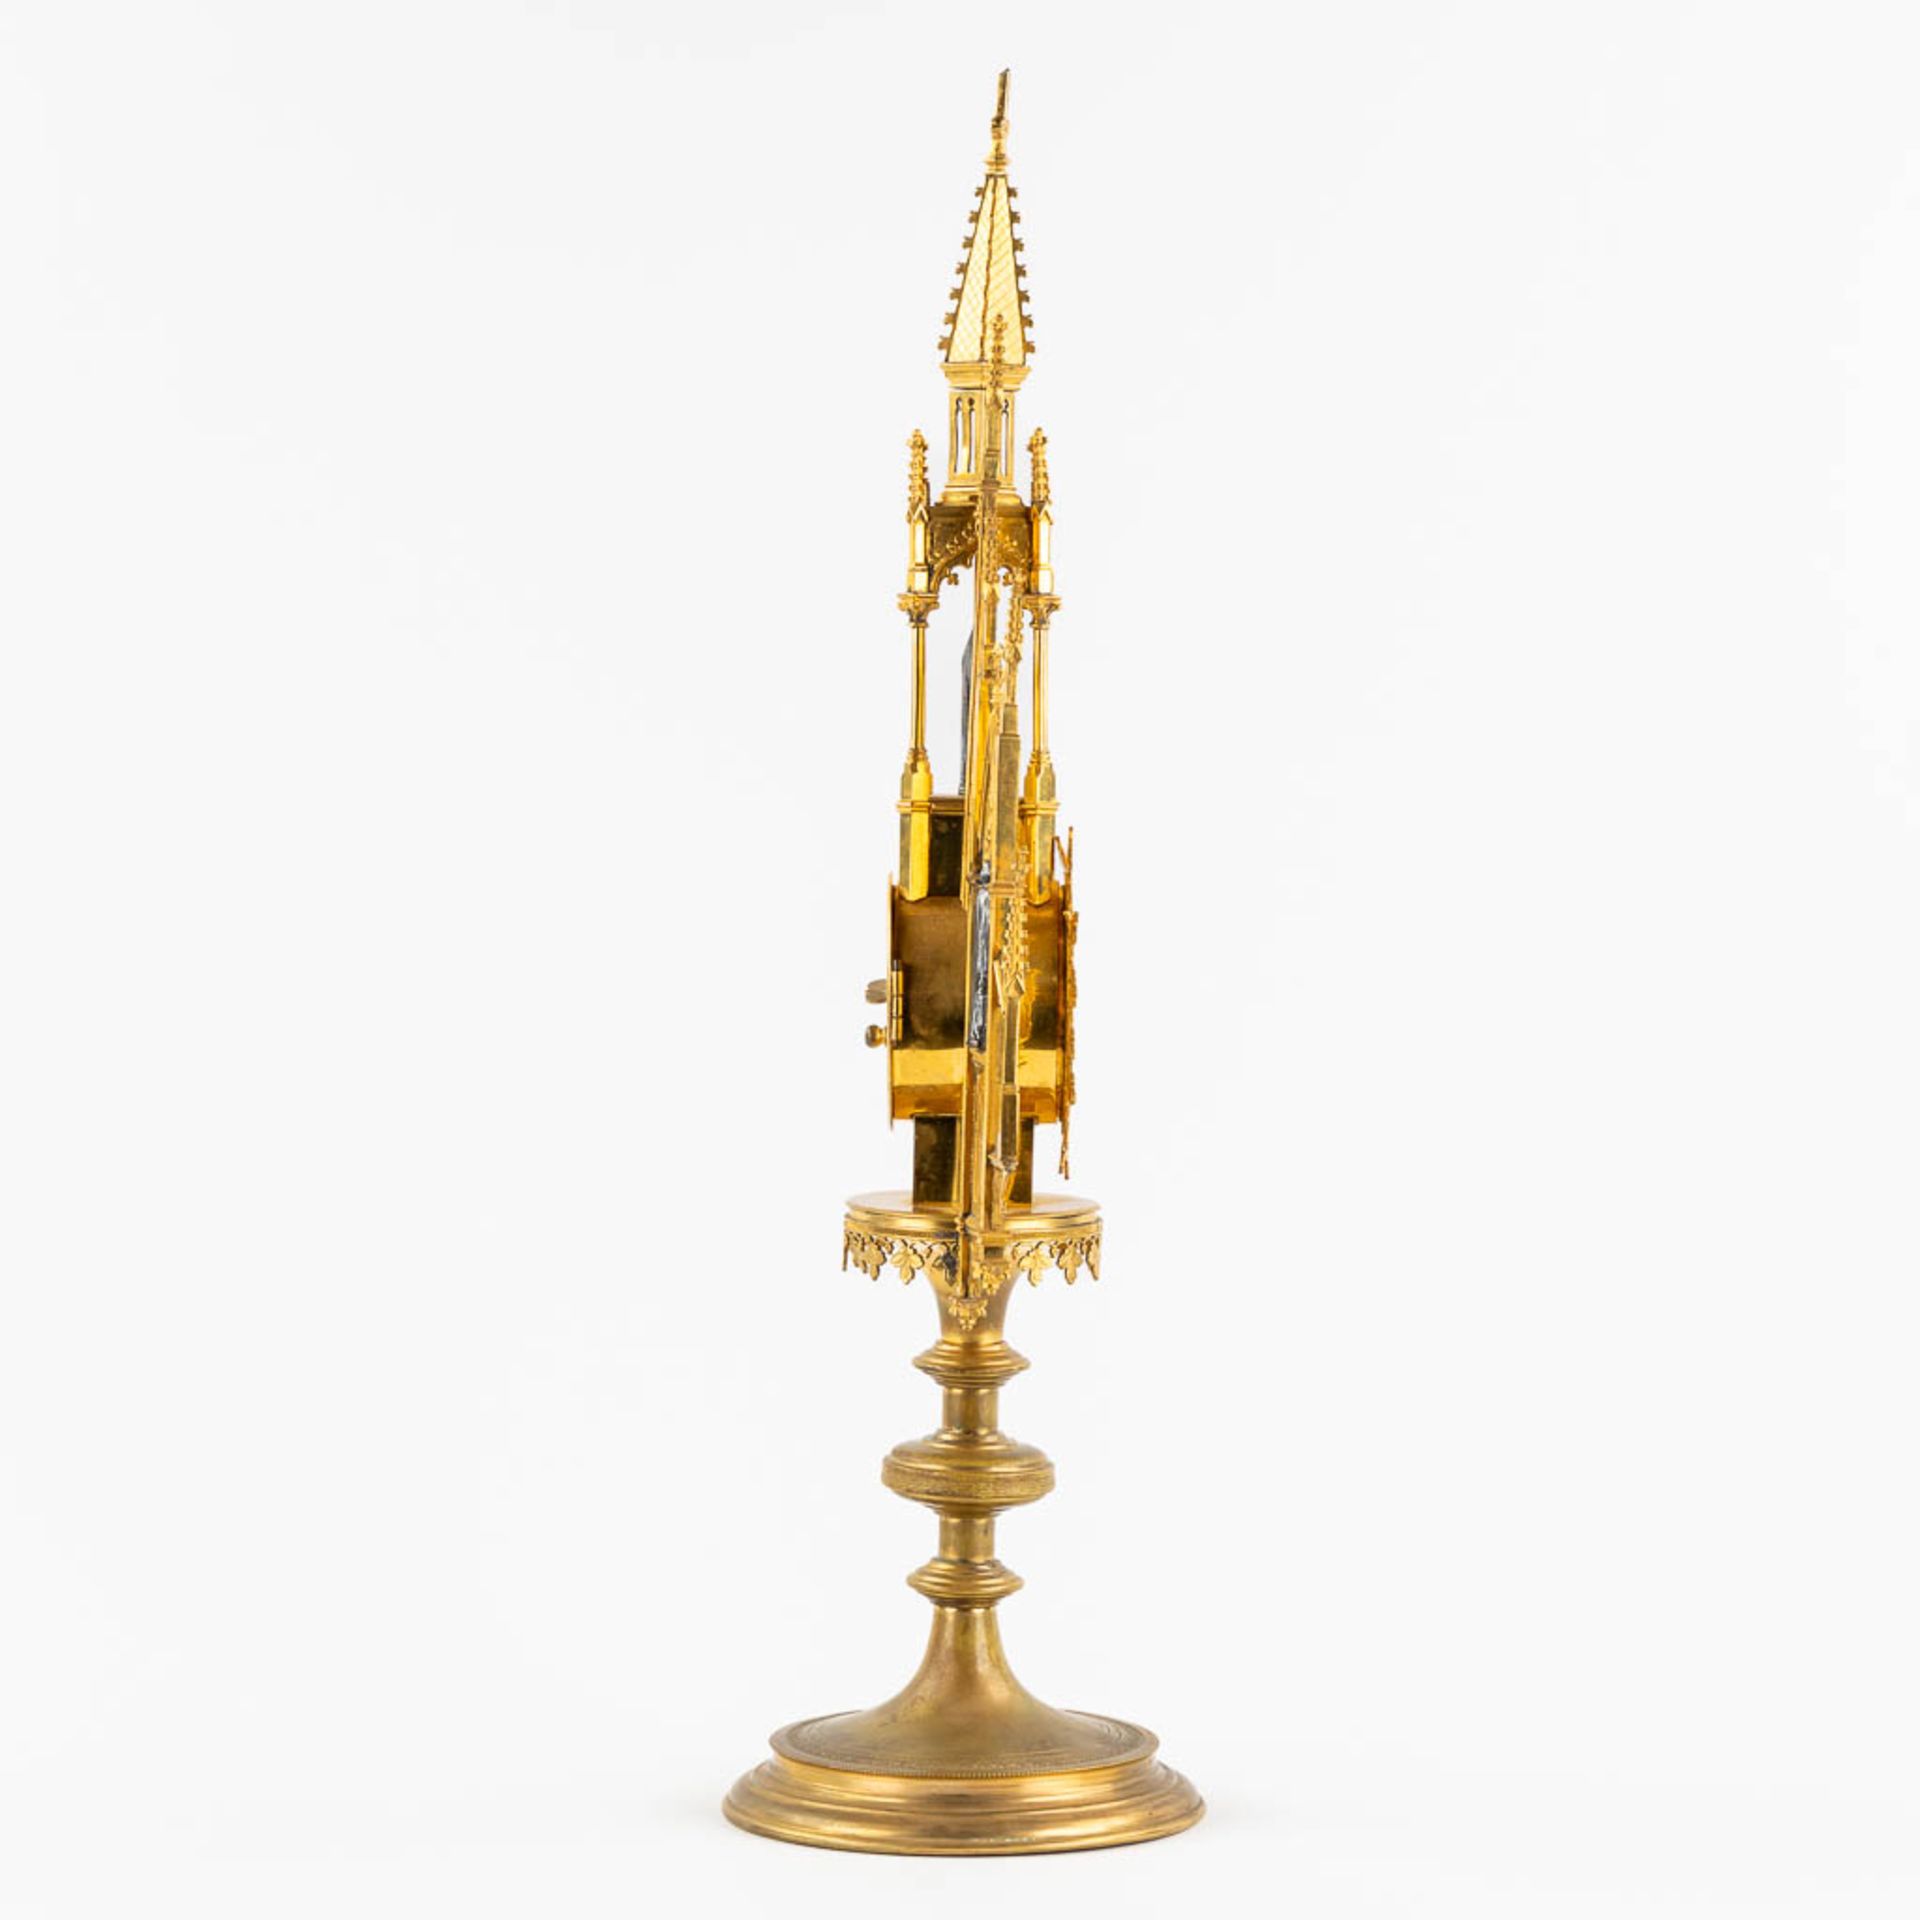 A Tower monstrance, gilt and silver plated brass, Gothic Revival. 19th C. (W:21,5 x H:58 cm) - Image 10 of 22